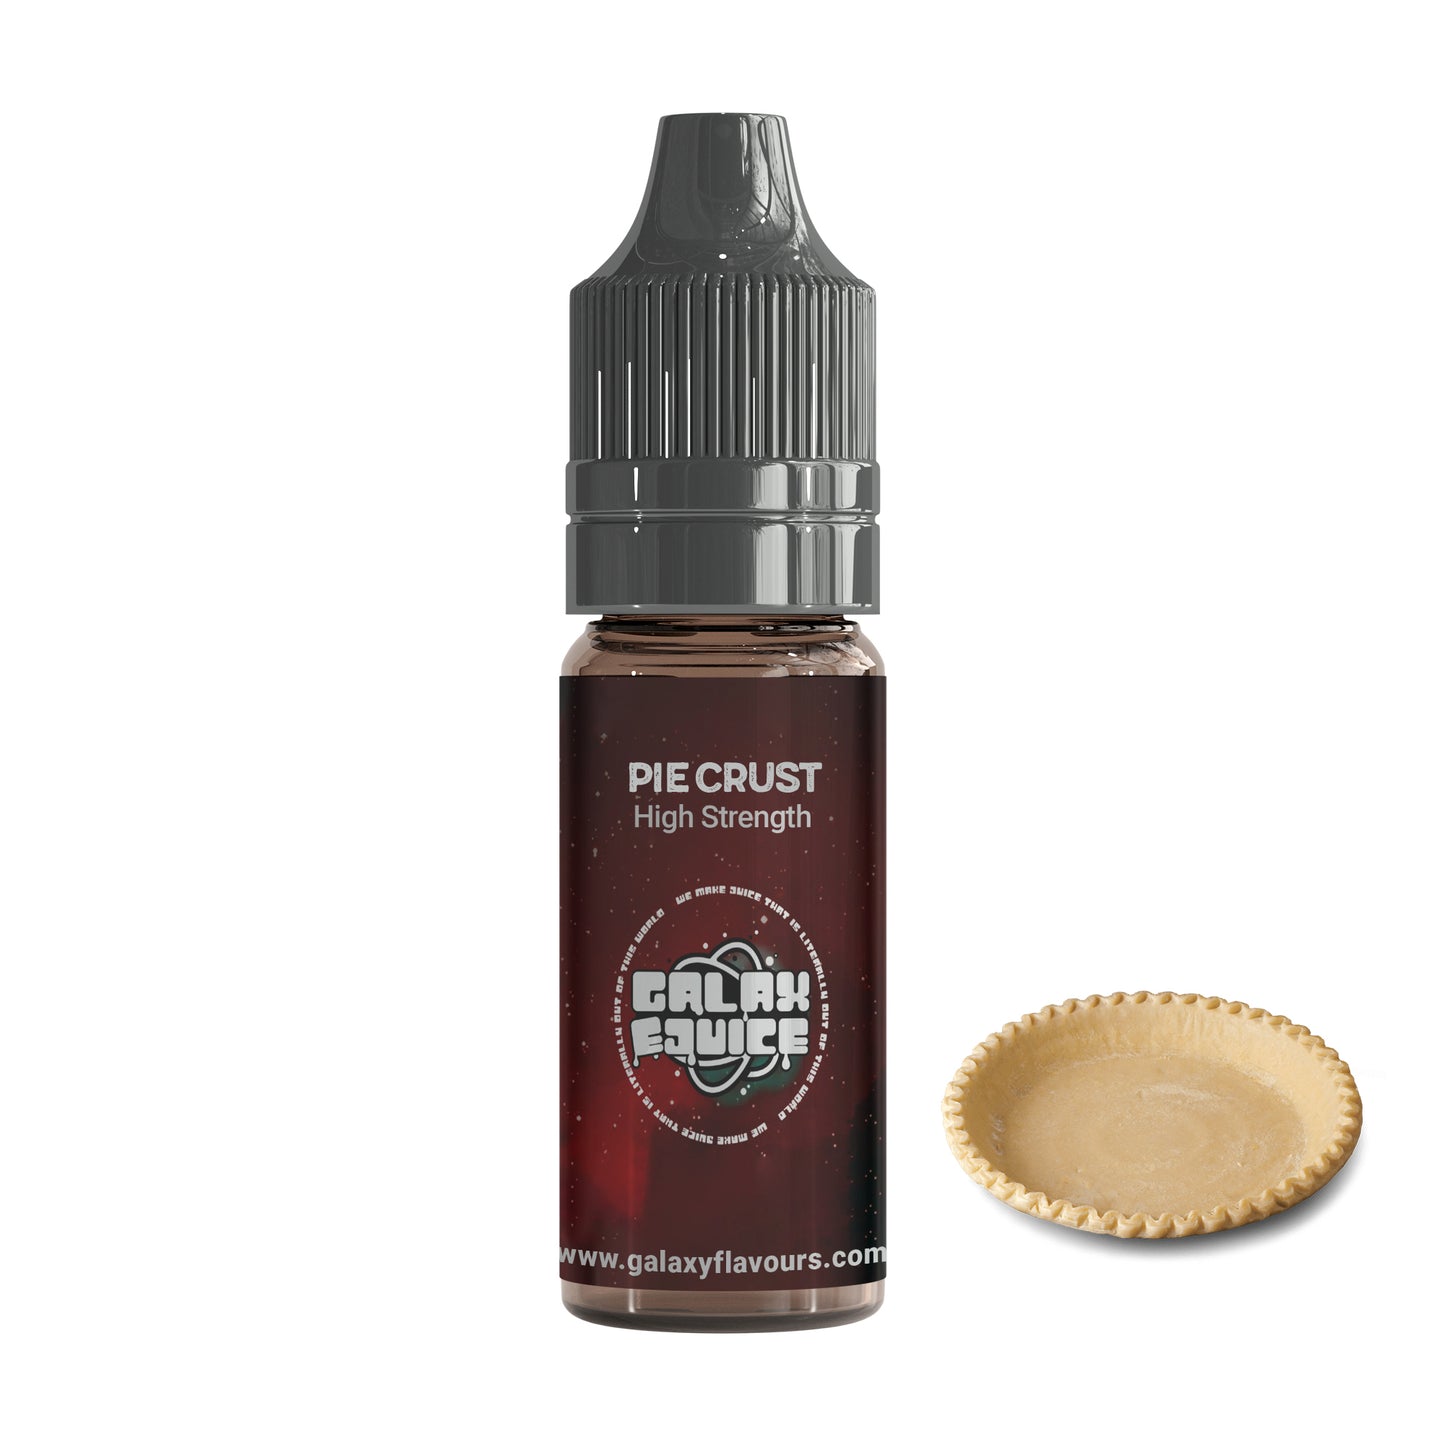 Pie Crust High Strength Professional Flavouring.